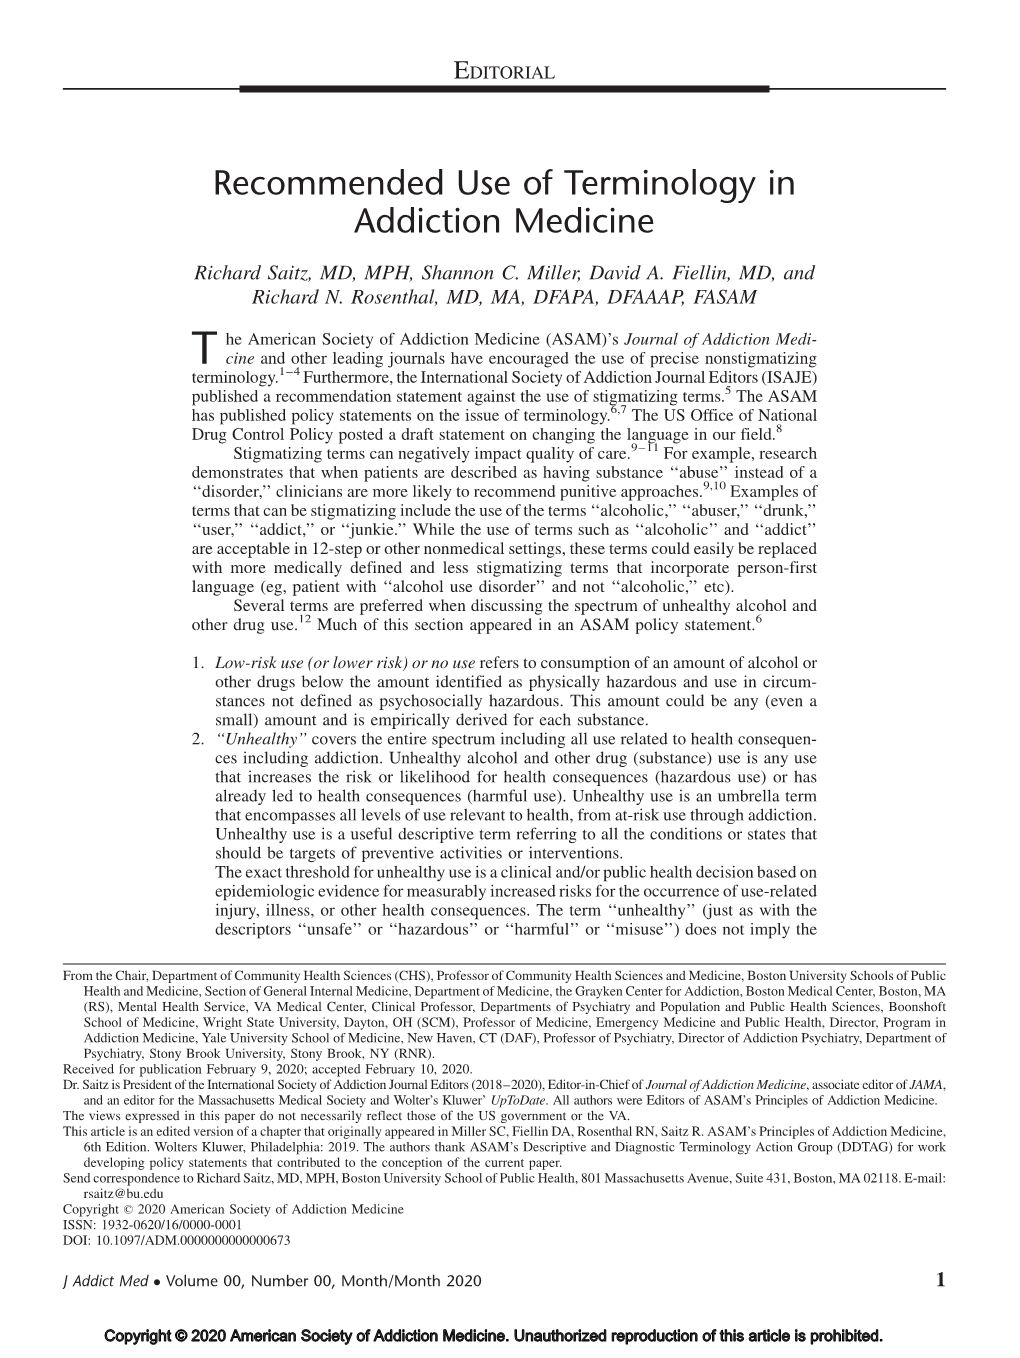 Recommended Use of Terminology in Addiction Medicine